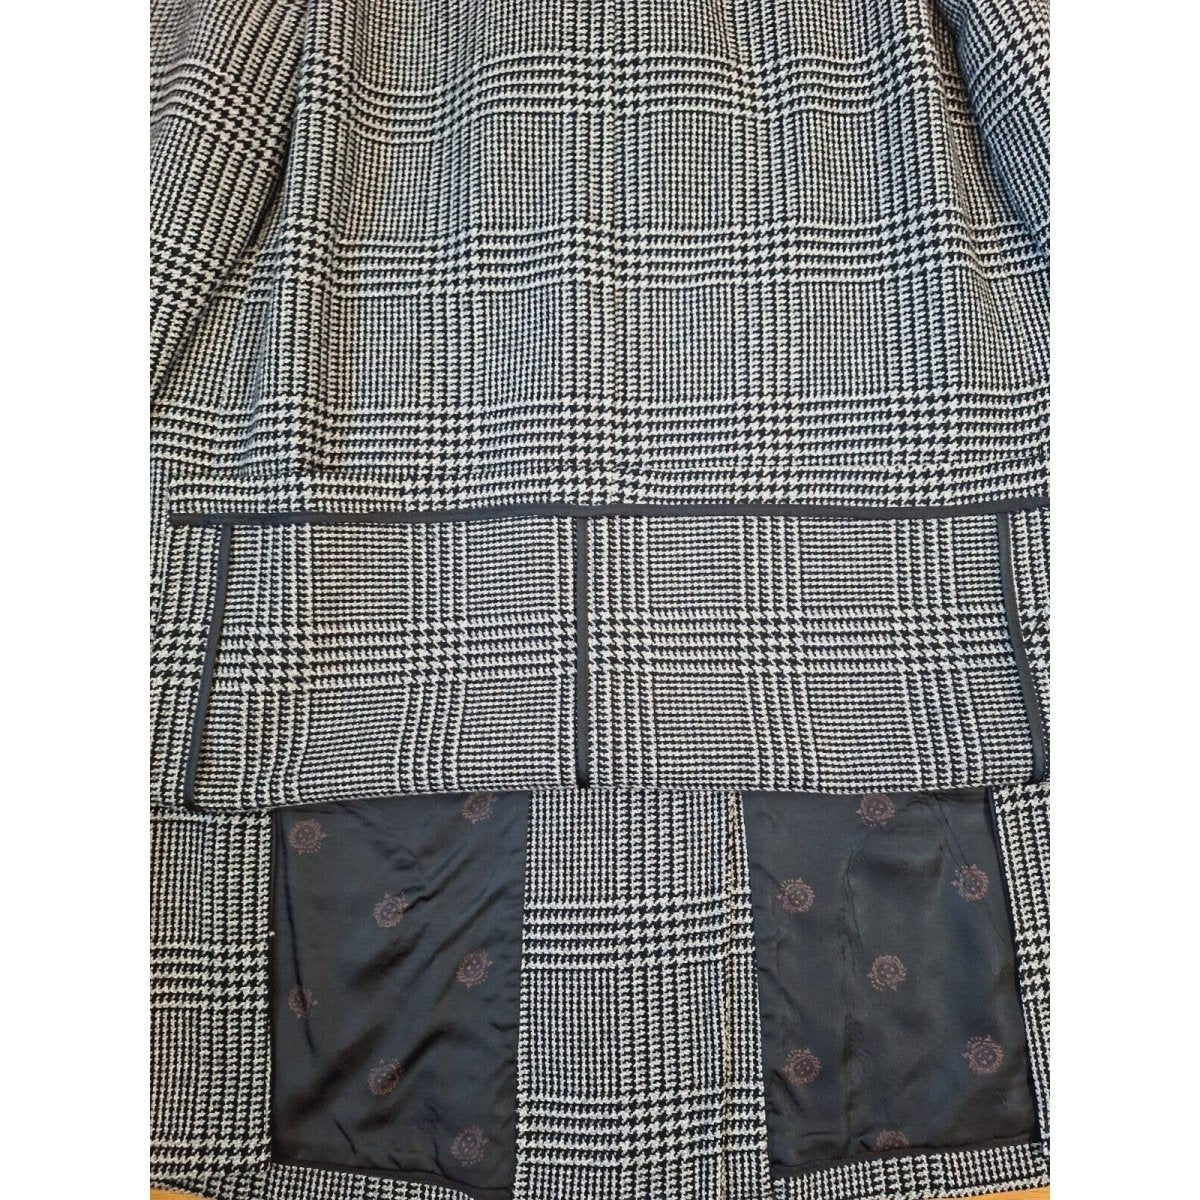 Vintage 60s Botany 500 Wool Plaid Topcoat Size 40R - themallvintage The Mall Vintage